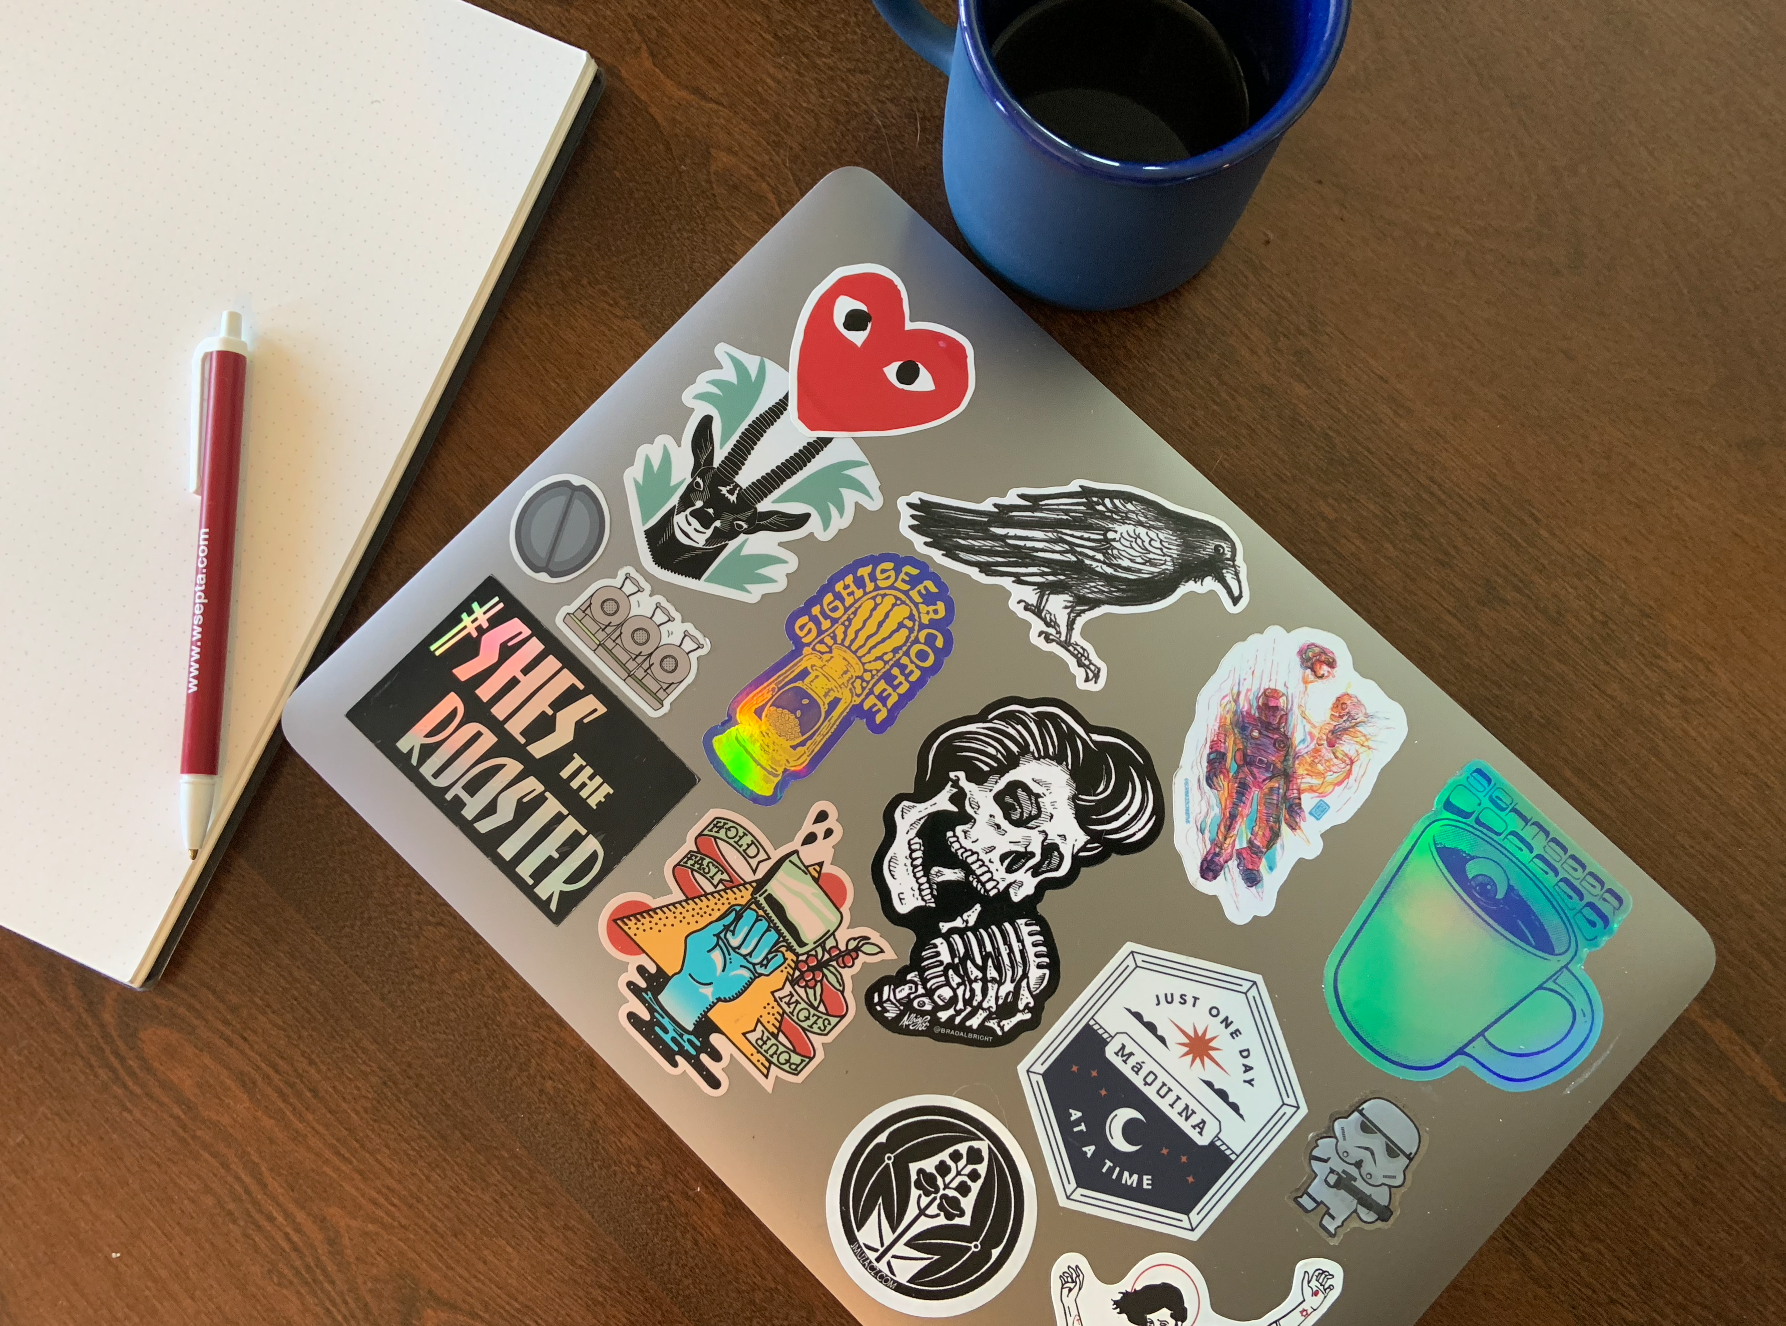 This image contains a laptop with many stickers on it, resting on a desk. The stickers on the laptop include the blue holographic Sightseer mug and purple holographic Sightseer lantern stickers.